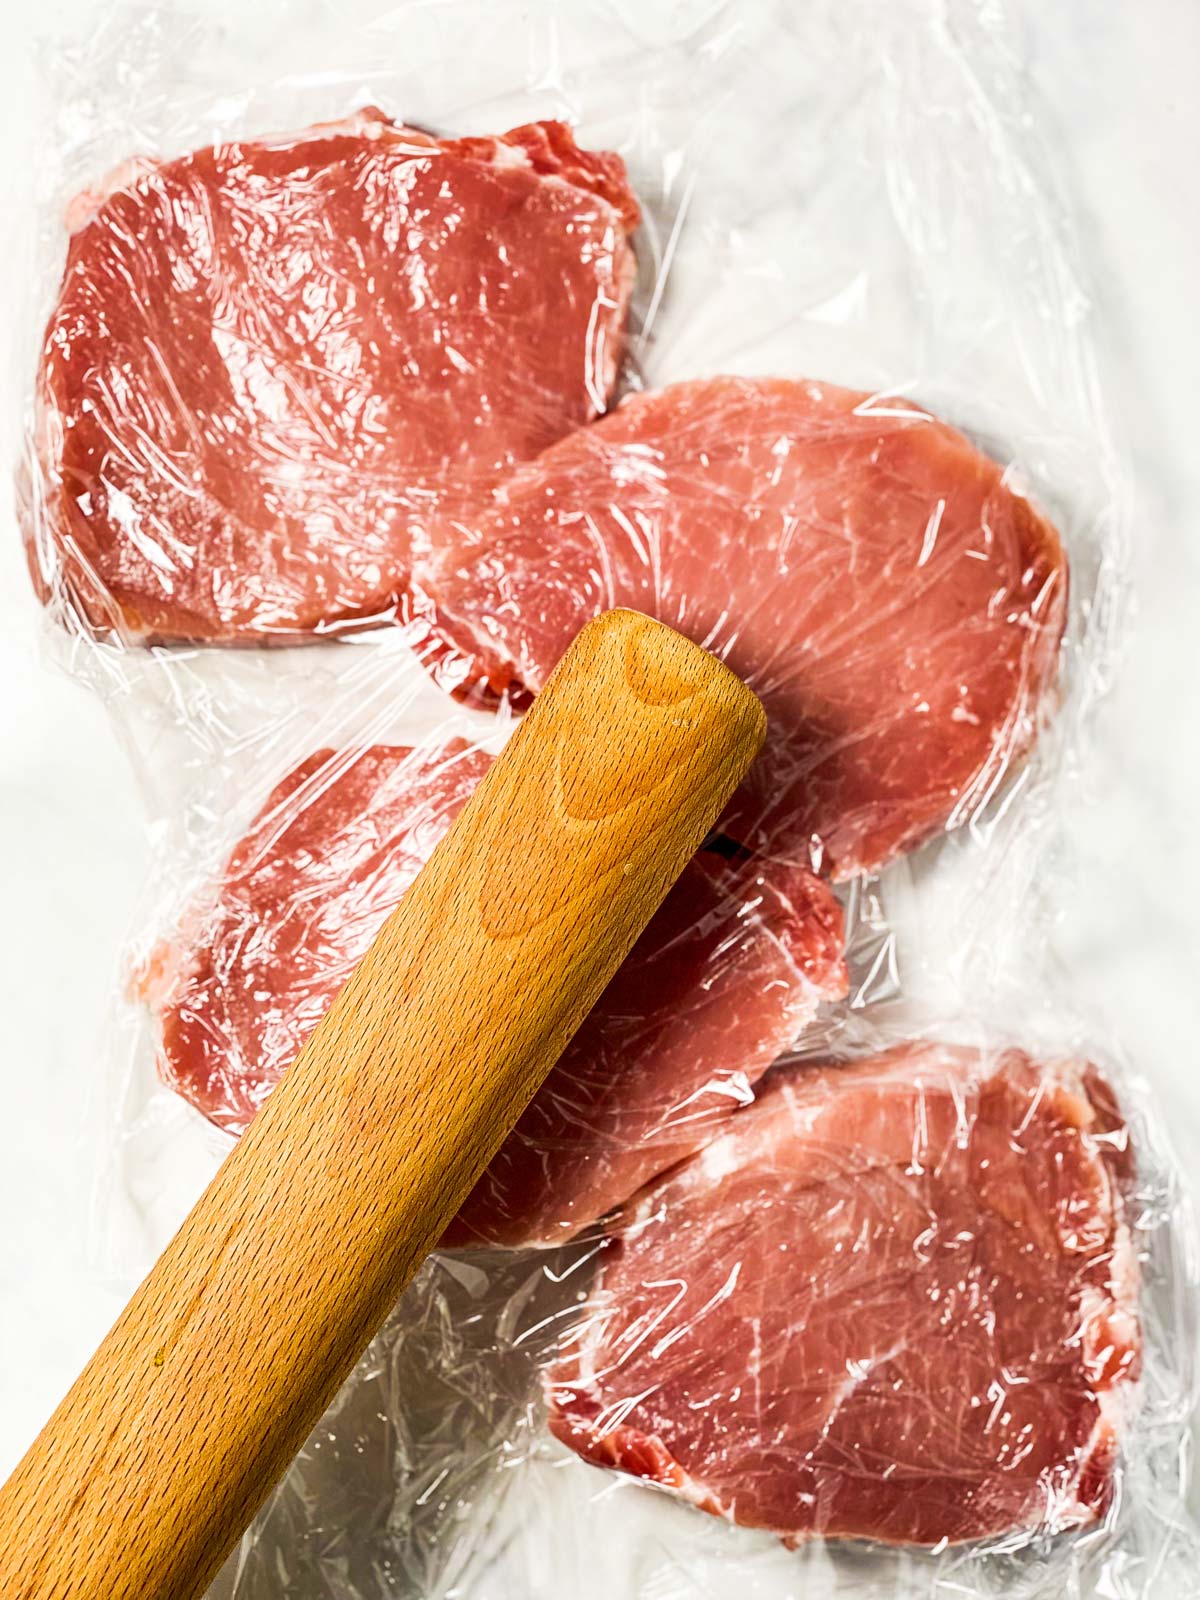 rolling pin pounding pork chops between two pieces of plastic wrap